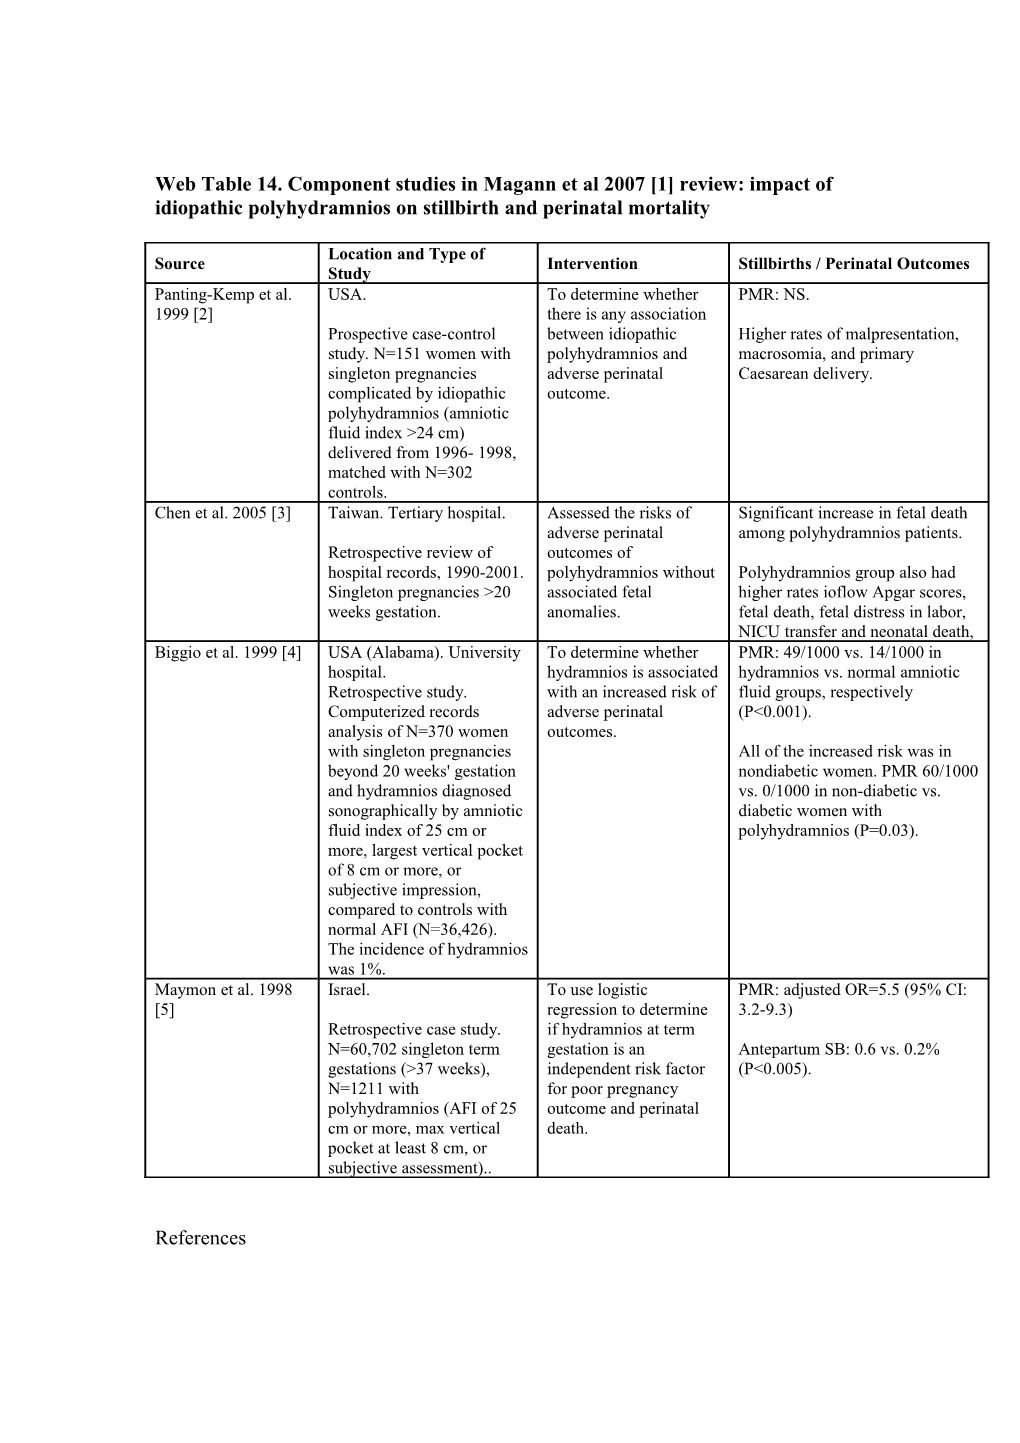 Web Table 14. Component Studies in Magann Et Al 2007 1 Review: Impact of Idiopathic